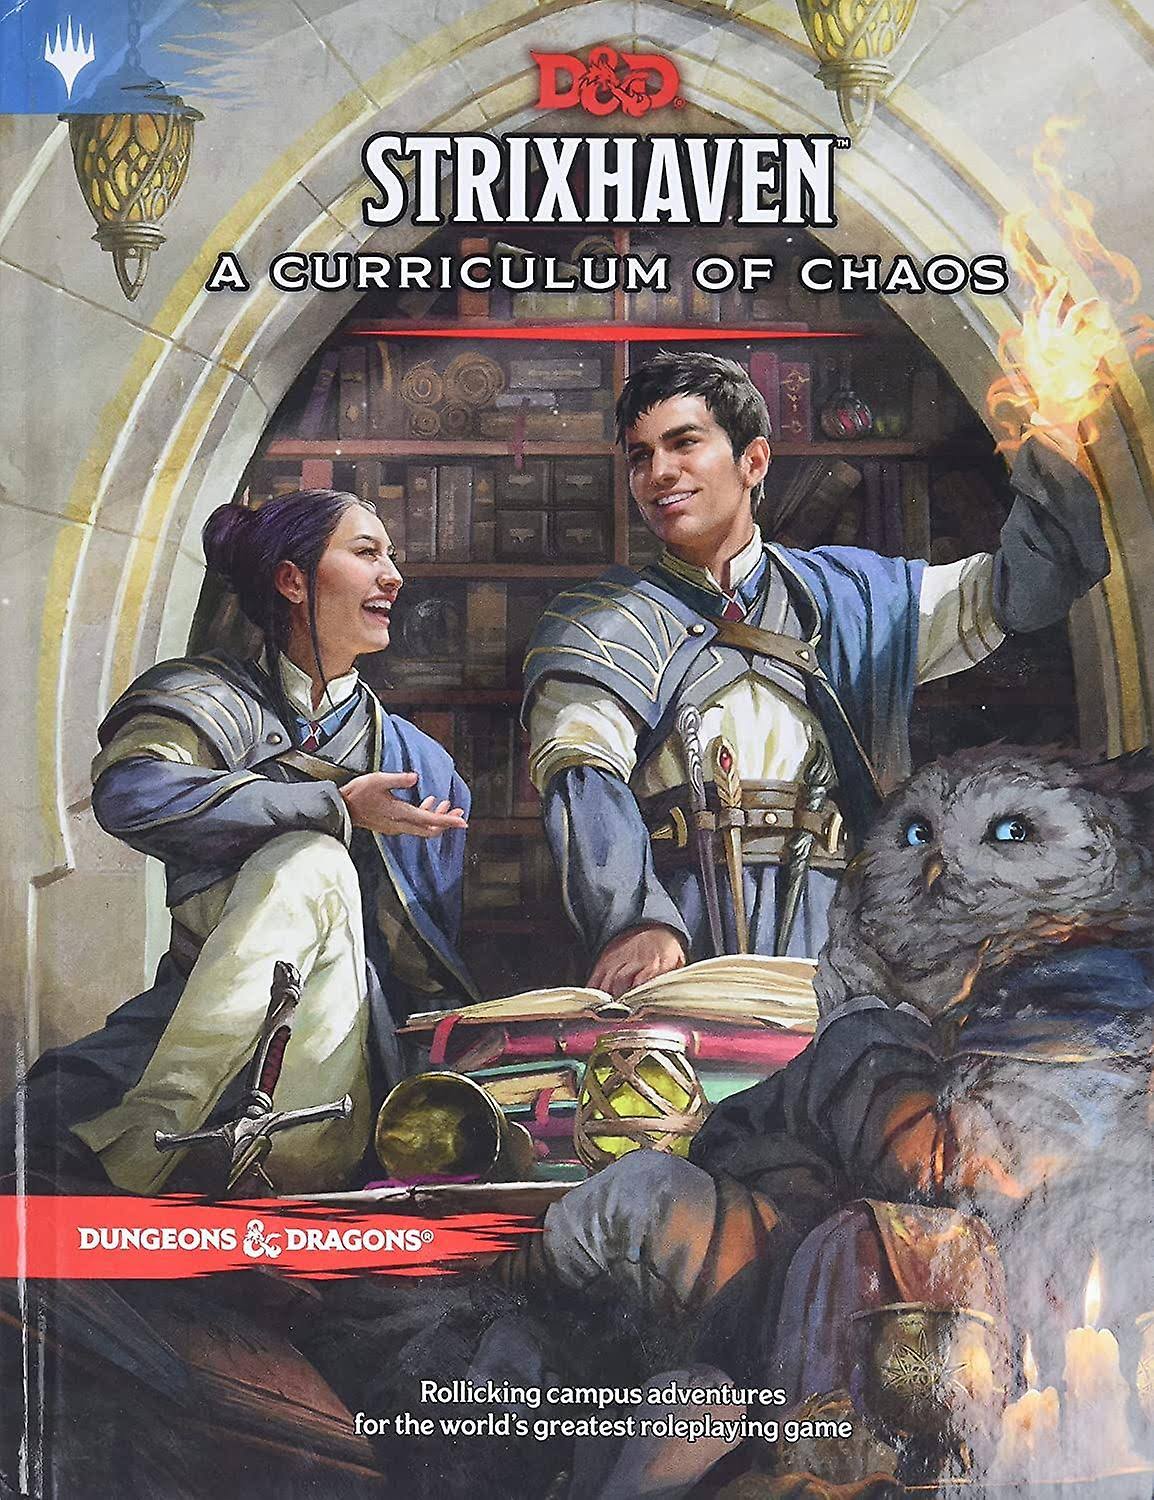 Dungeons & Dragons - Strixhaven Curriculum of Chaos